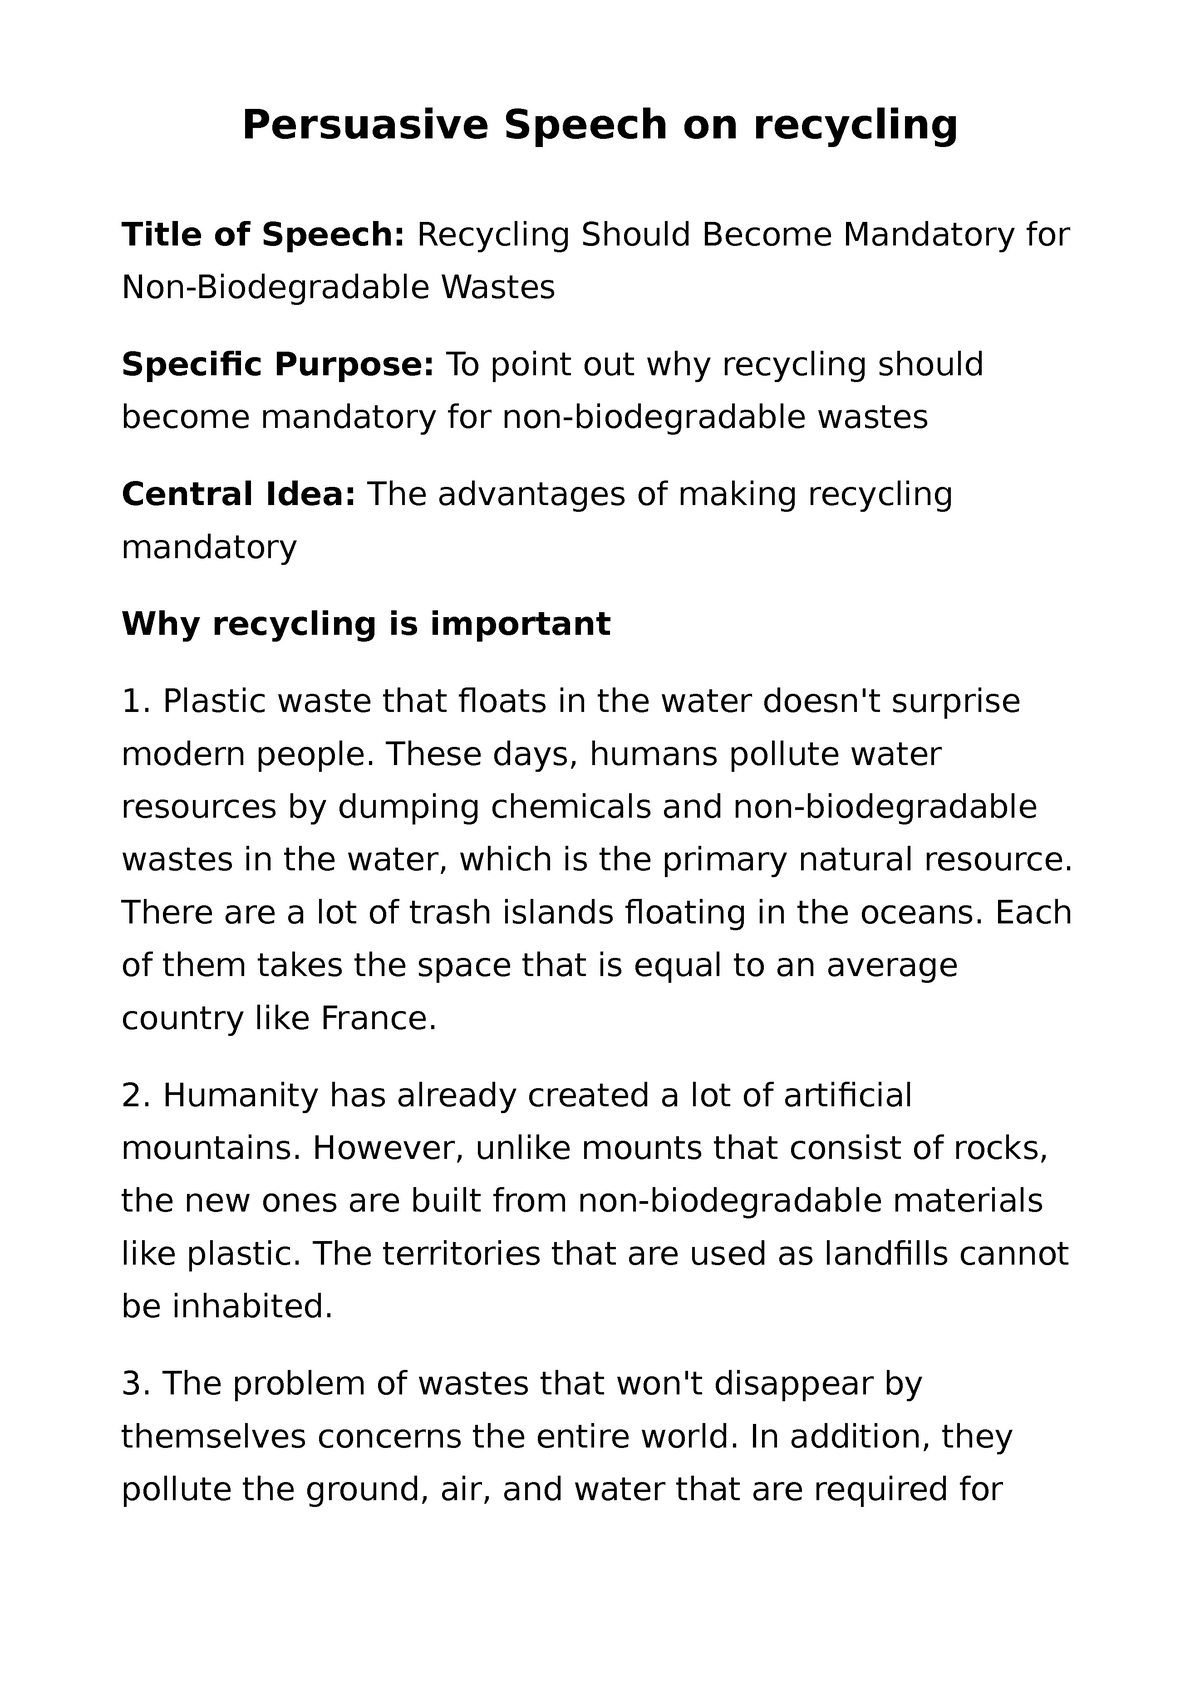 persuasive speech outline recycling